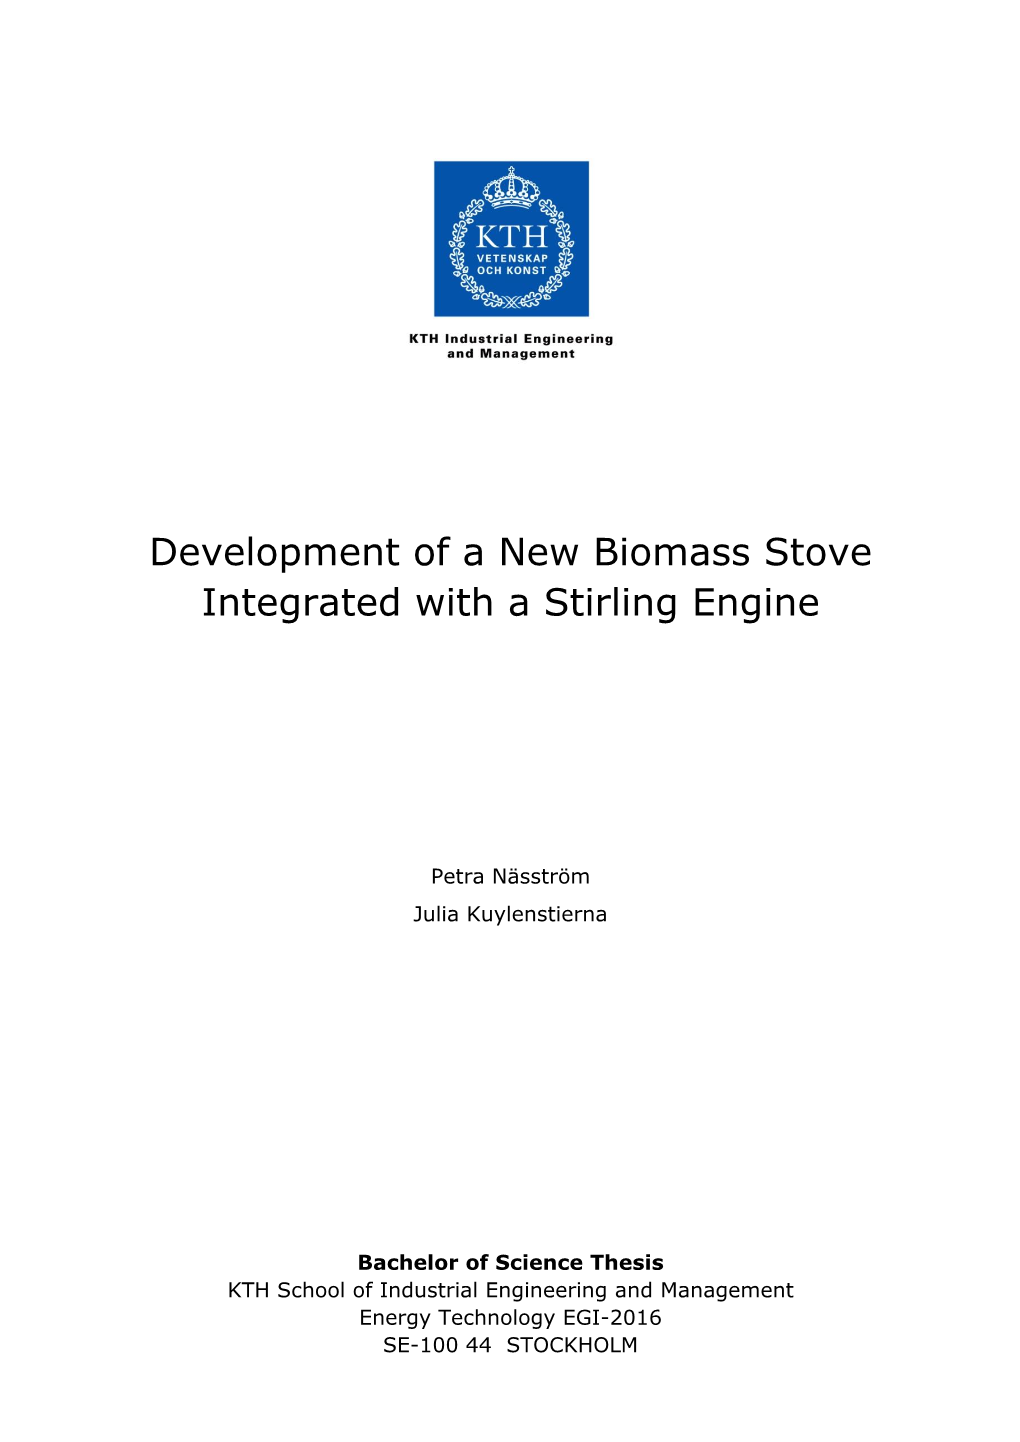 Development of a New Biomass Stove Integrated with a Stirling Engine